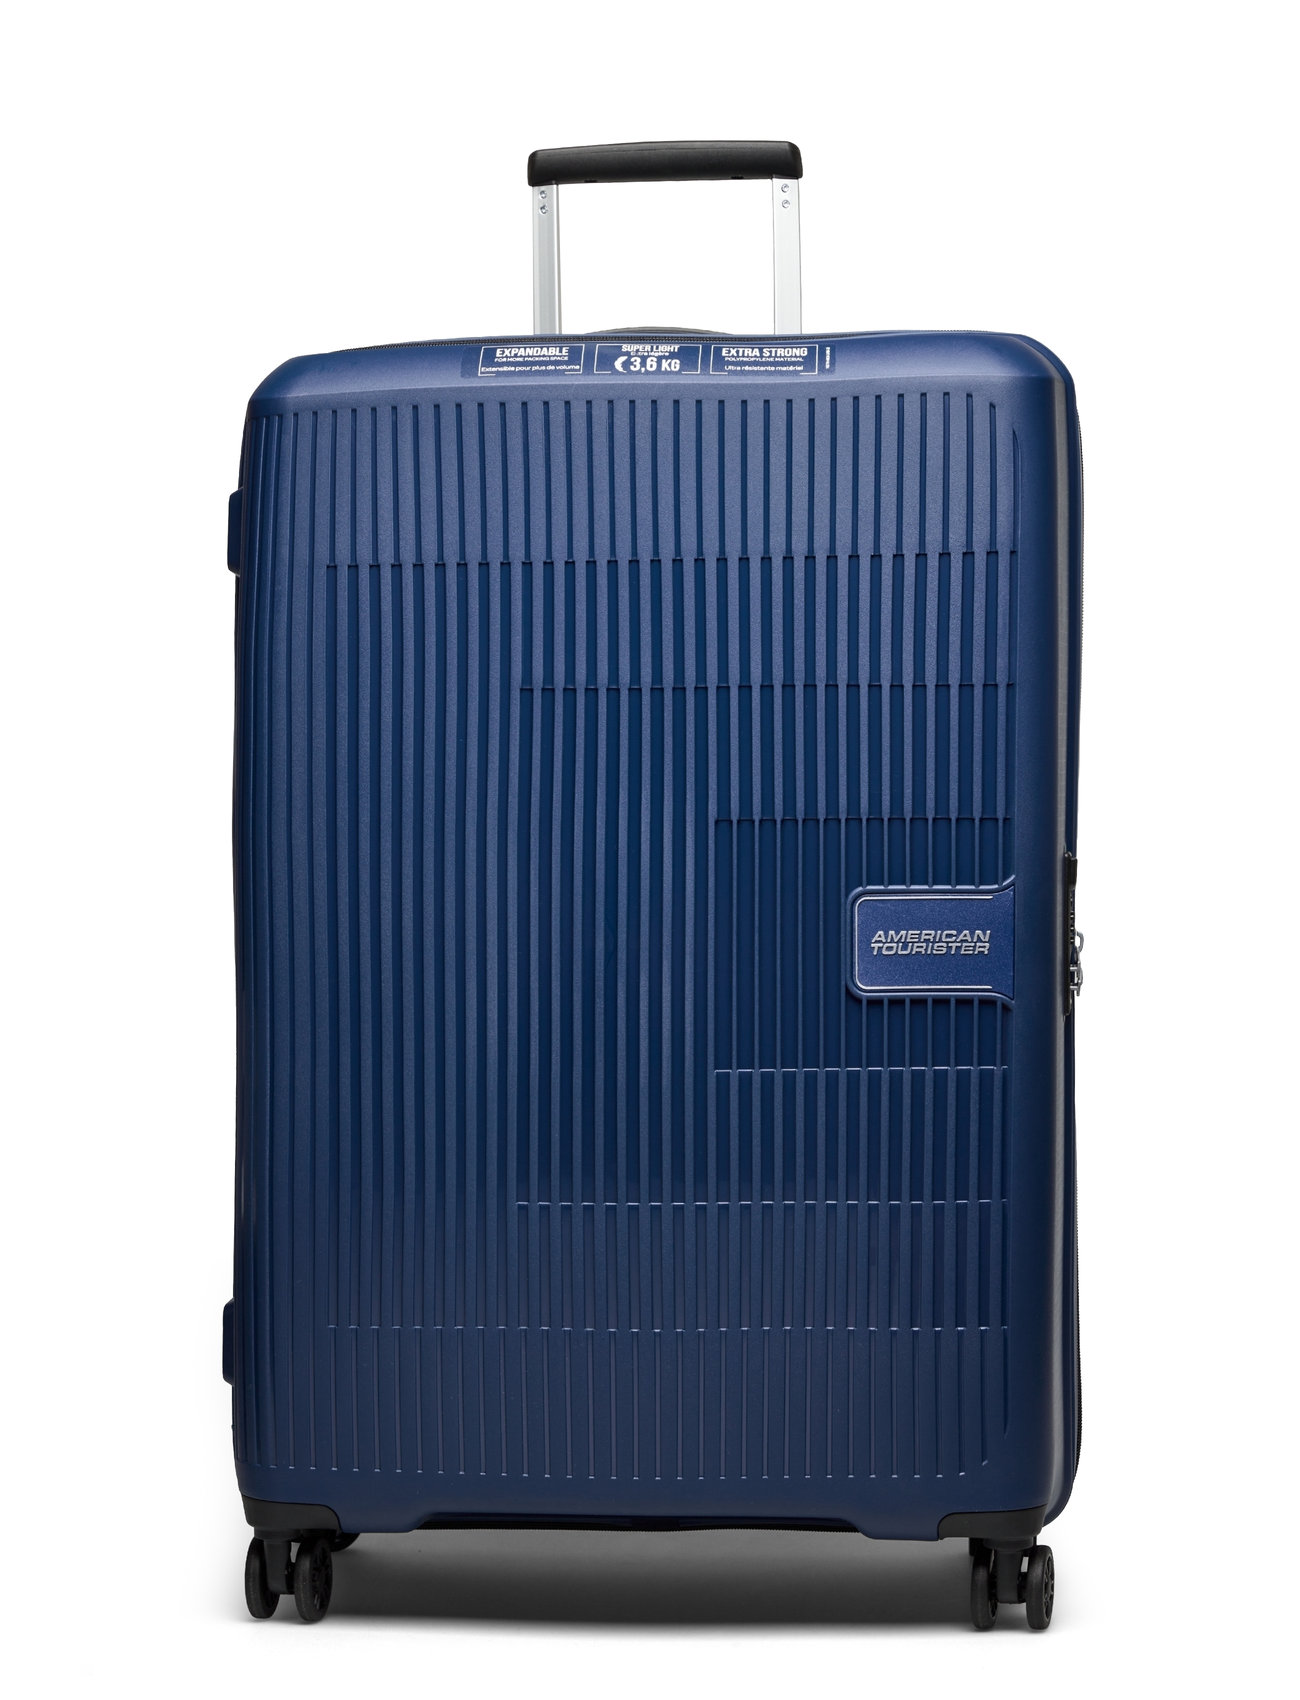 "American Tourister" "Aerostep Spinner 77/28 Exp Tsa Bags Suitcases Blue American